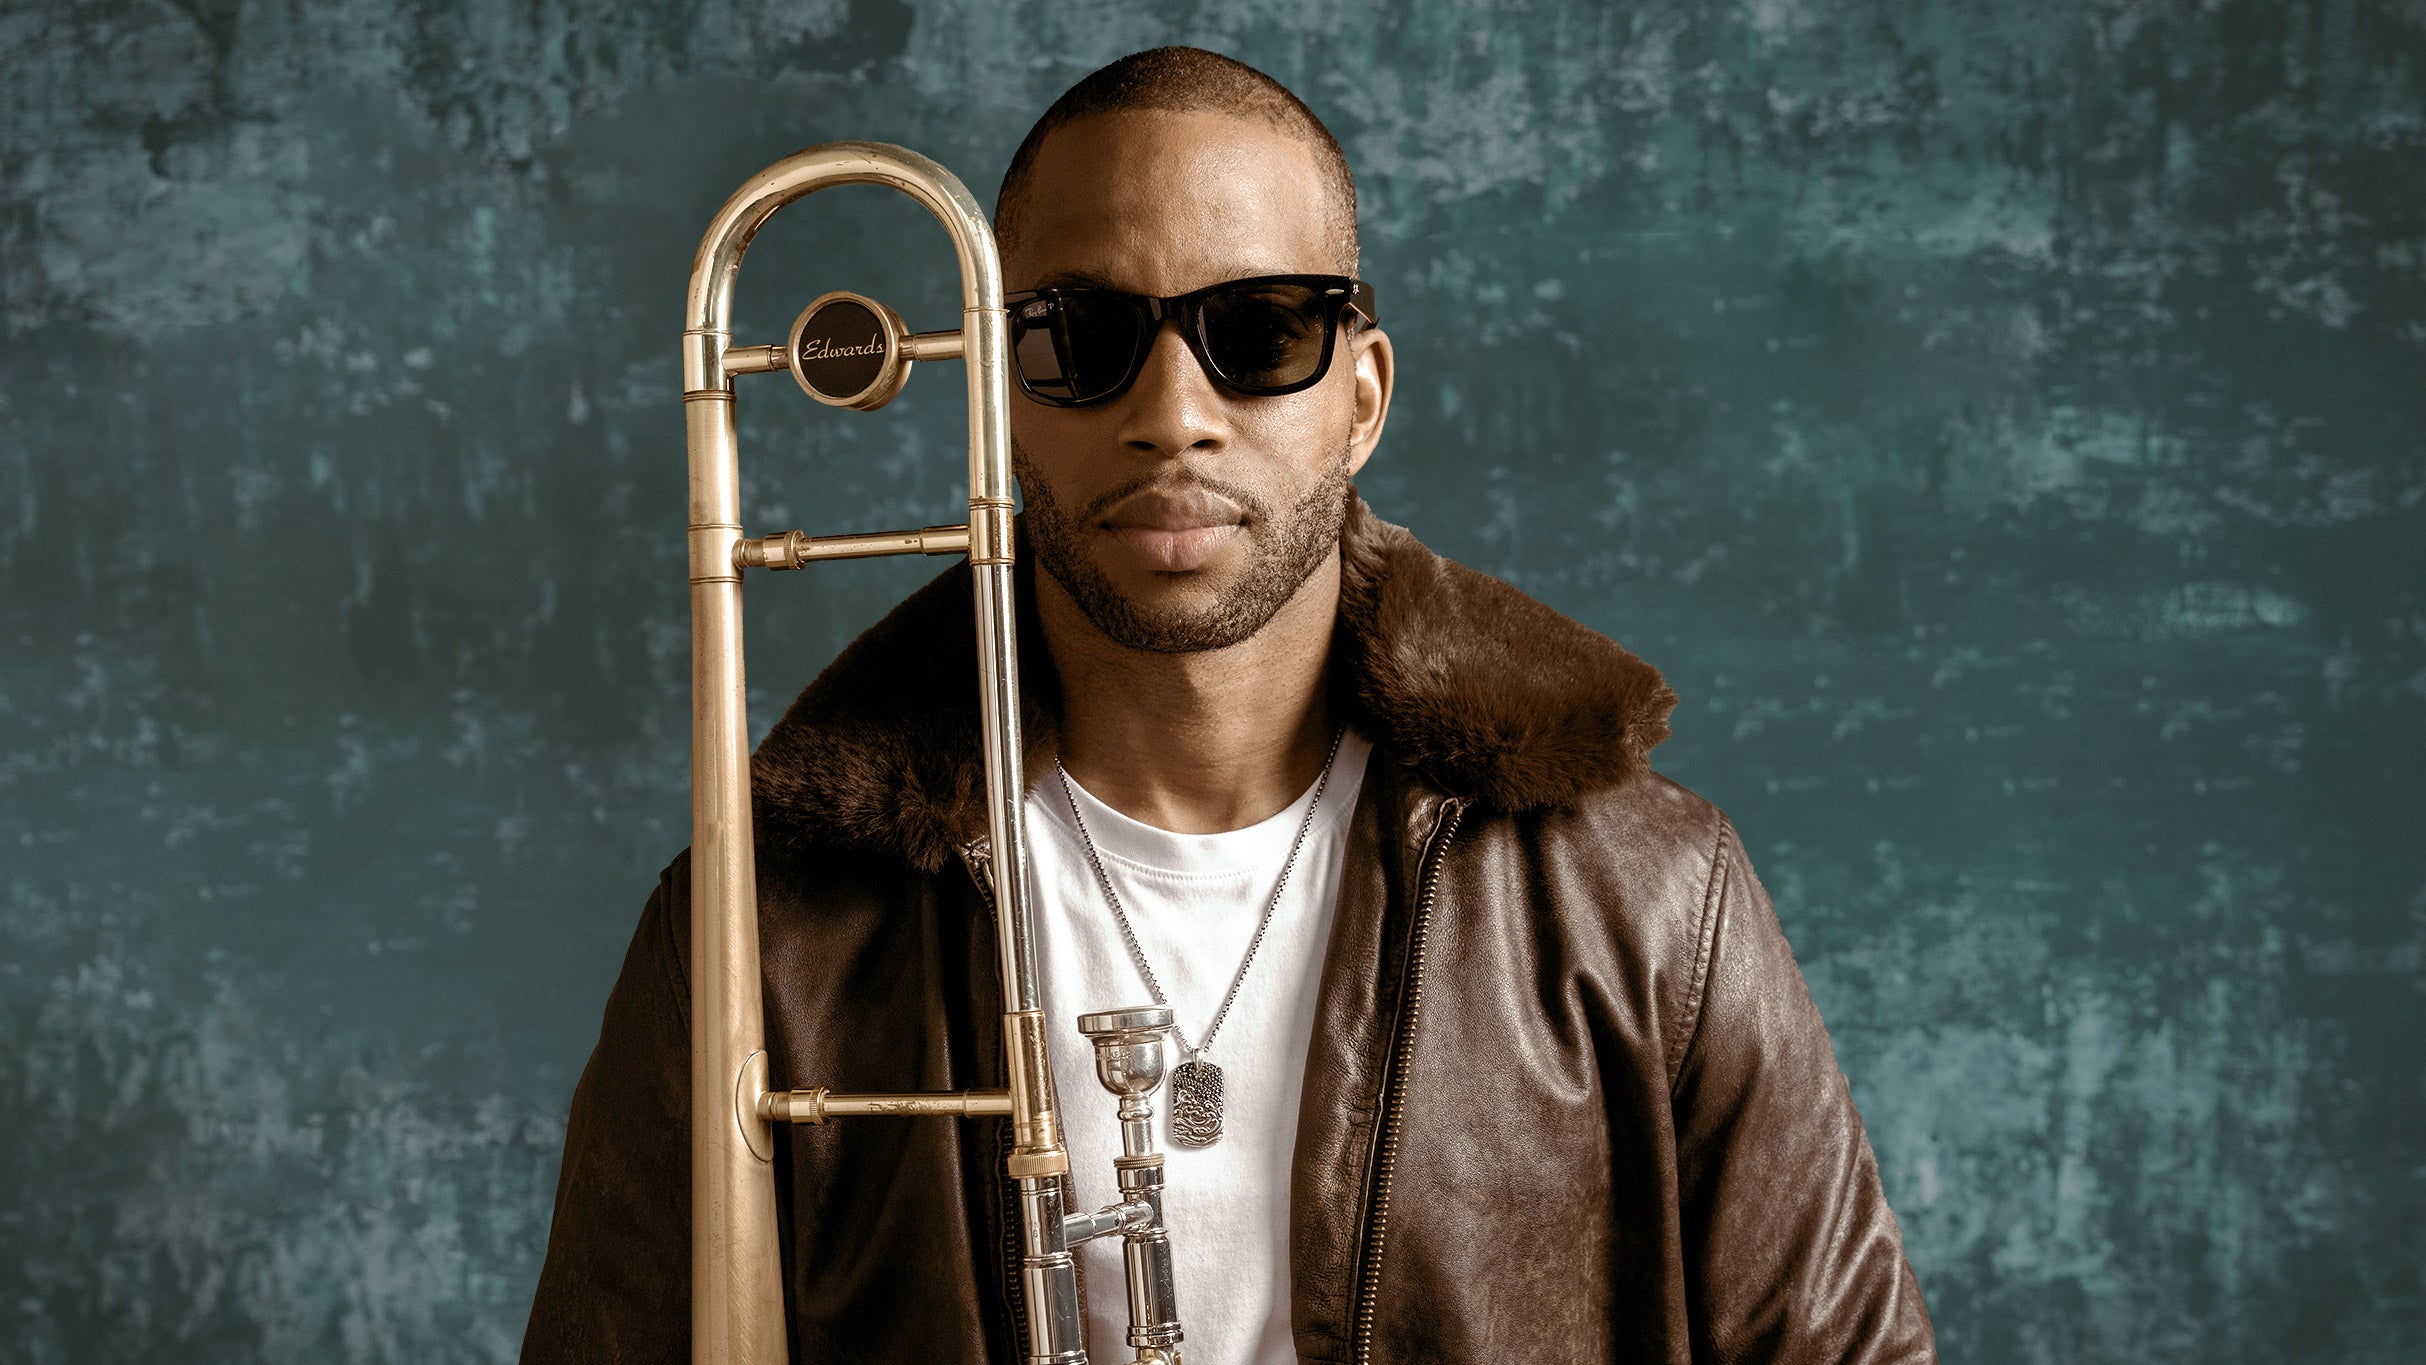 presale code to Trombone Shorty & Orleans Avenue And Ziggy Marley face value tickets in Woodinville at Chateau Ste Michelle Winery